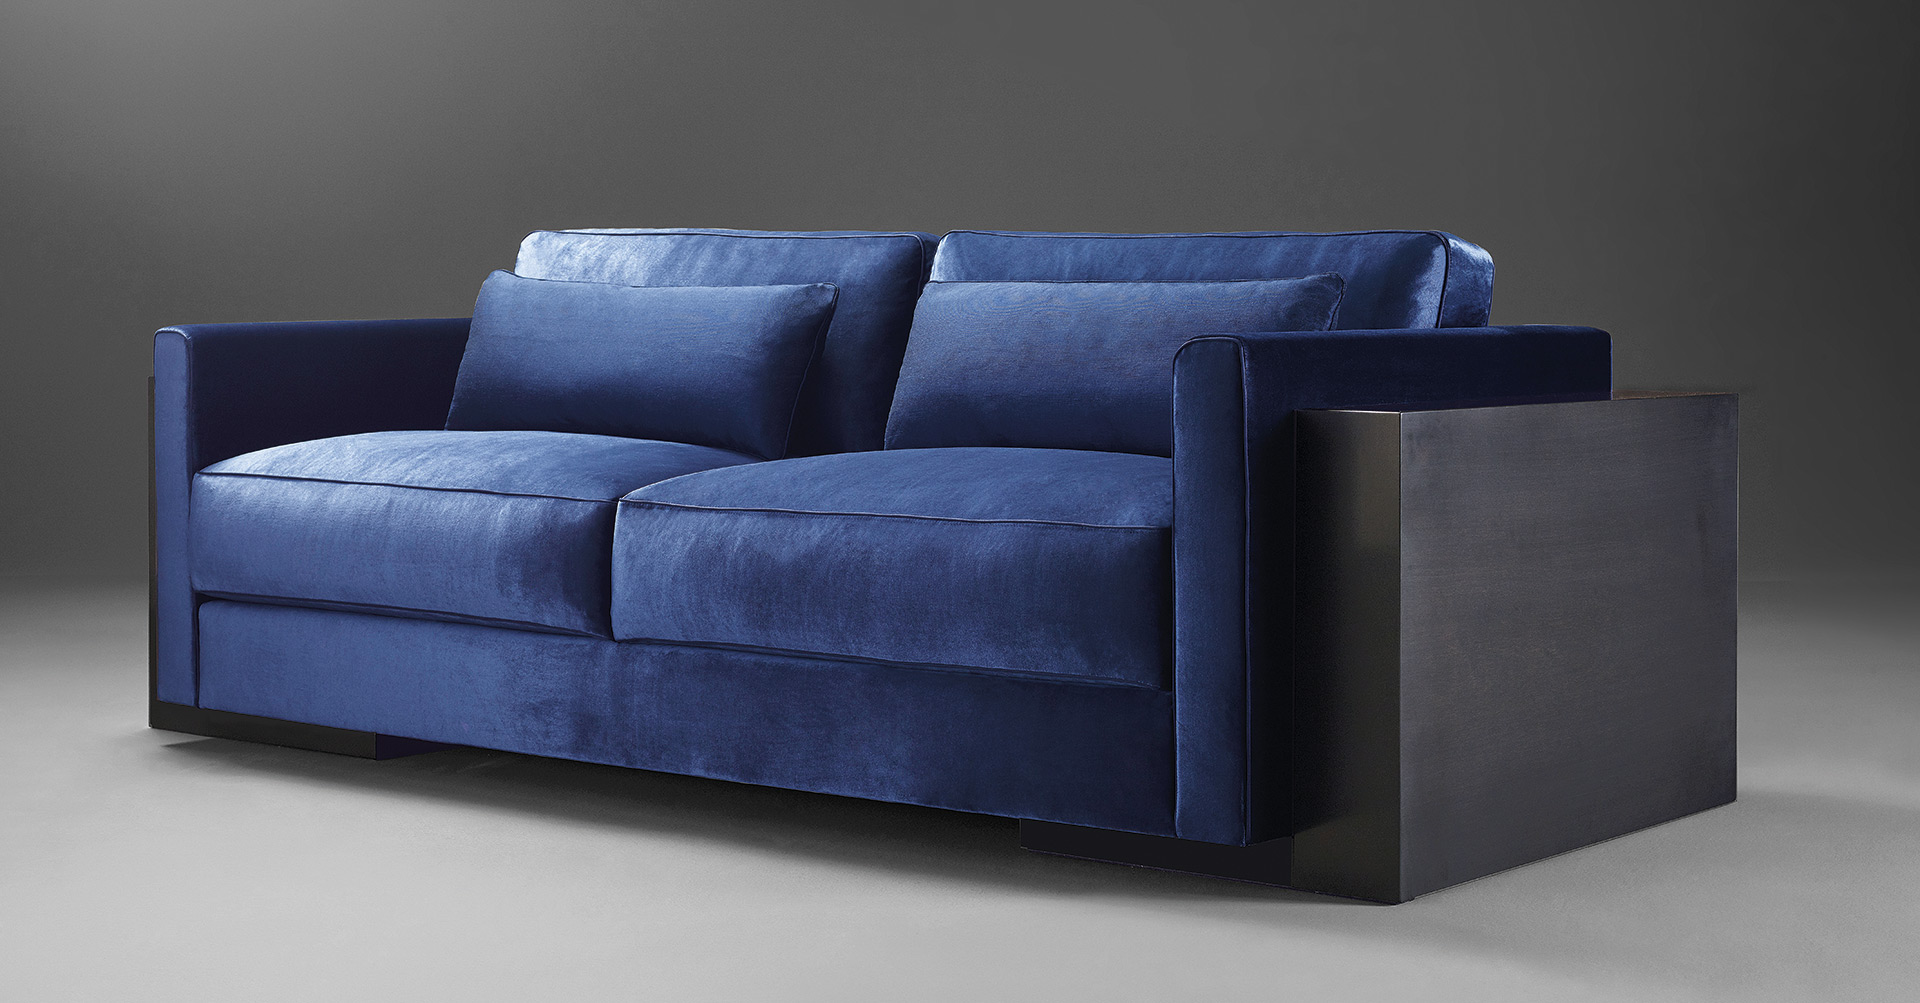 Ipparco is a wooden sofa with seat and back cushions in fabric, from Promemoria's Amaranthine Tales collection | Promemoria